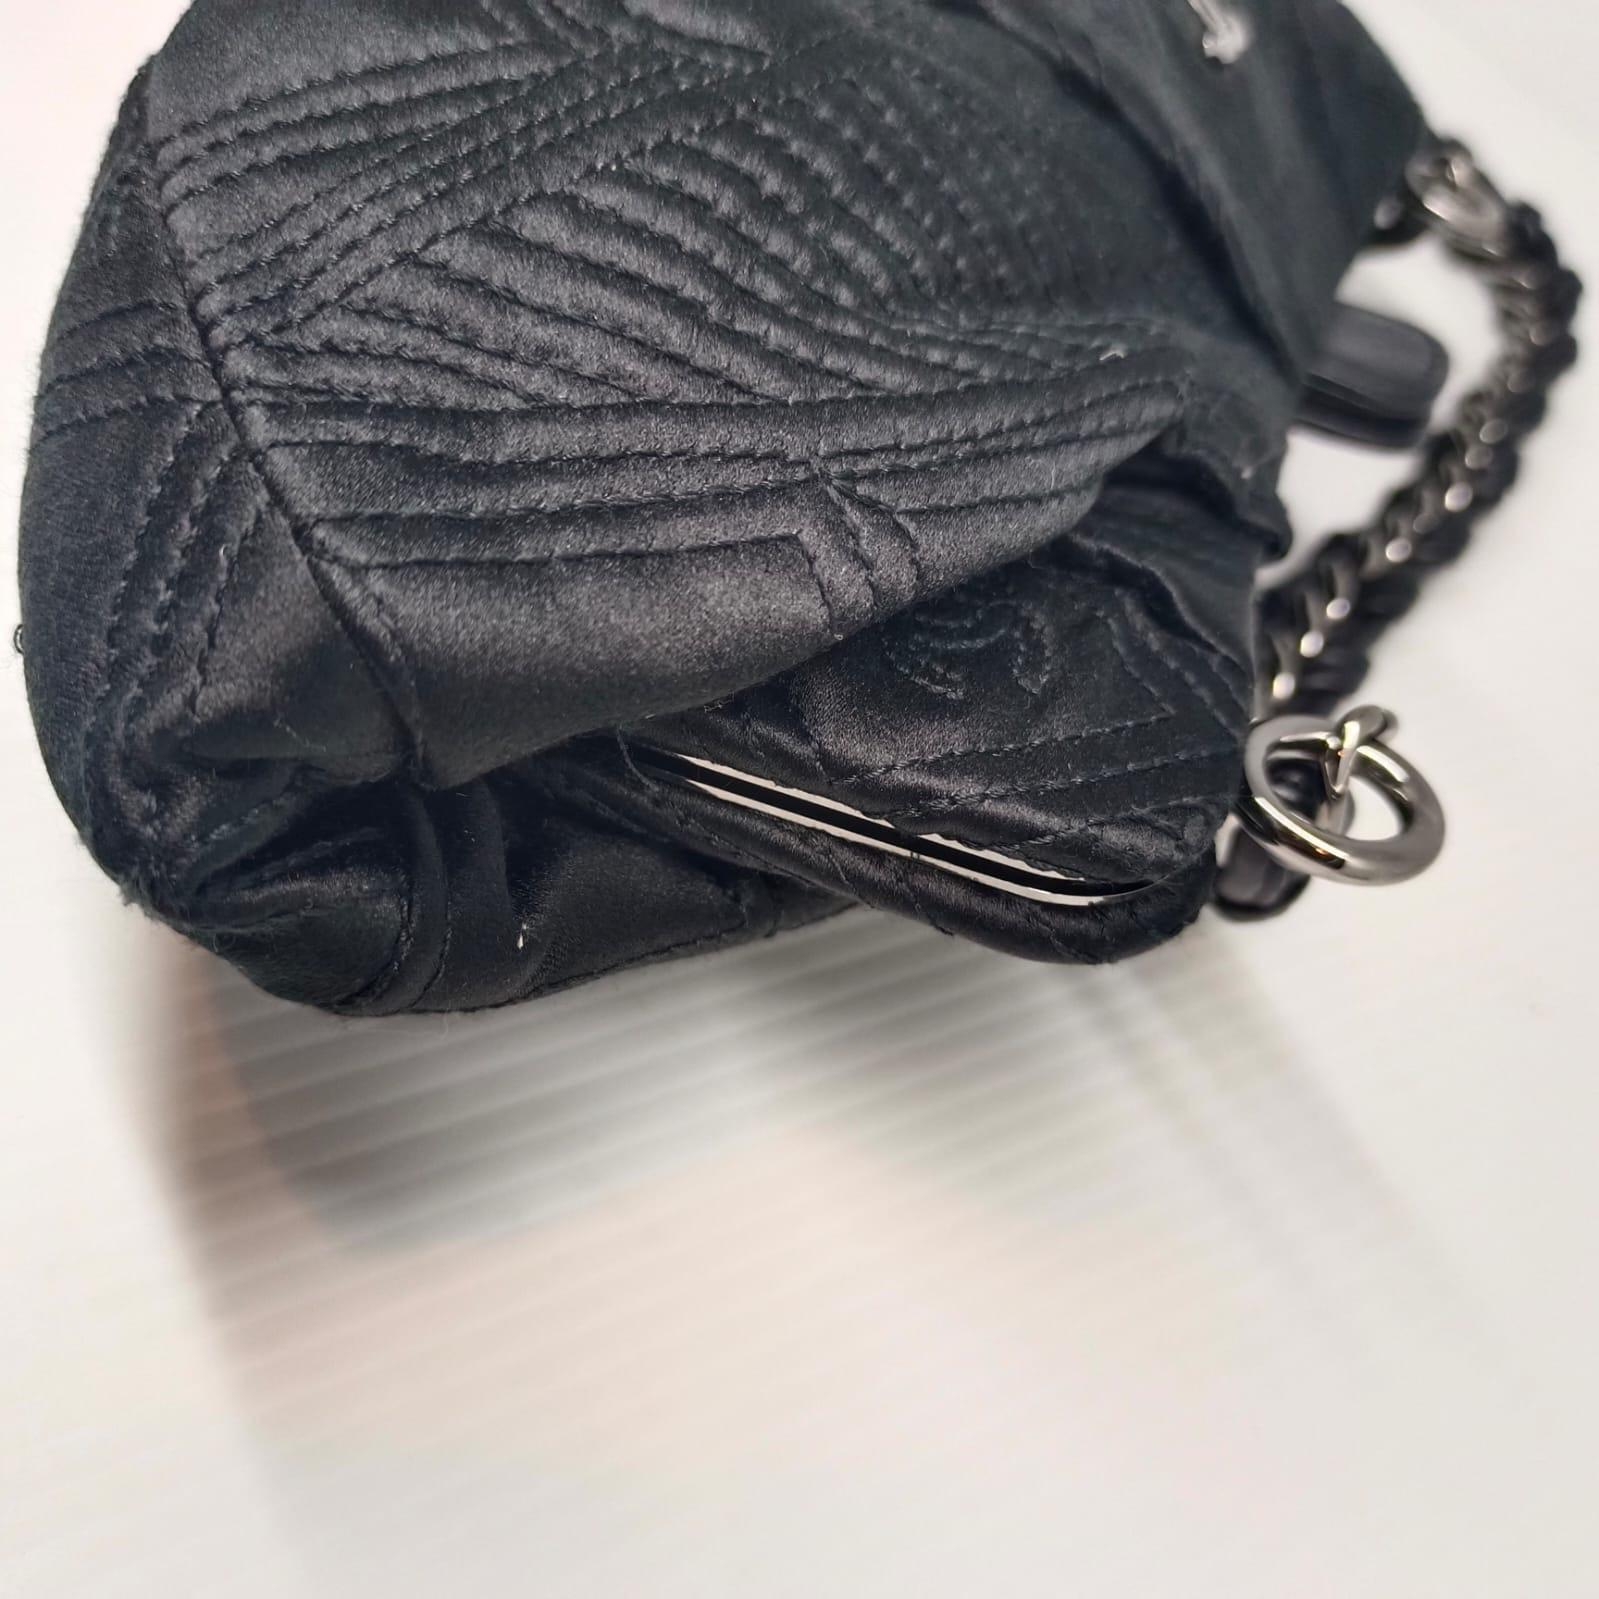 Chanel Black Satin Quilted Evening Bag For Sale 3